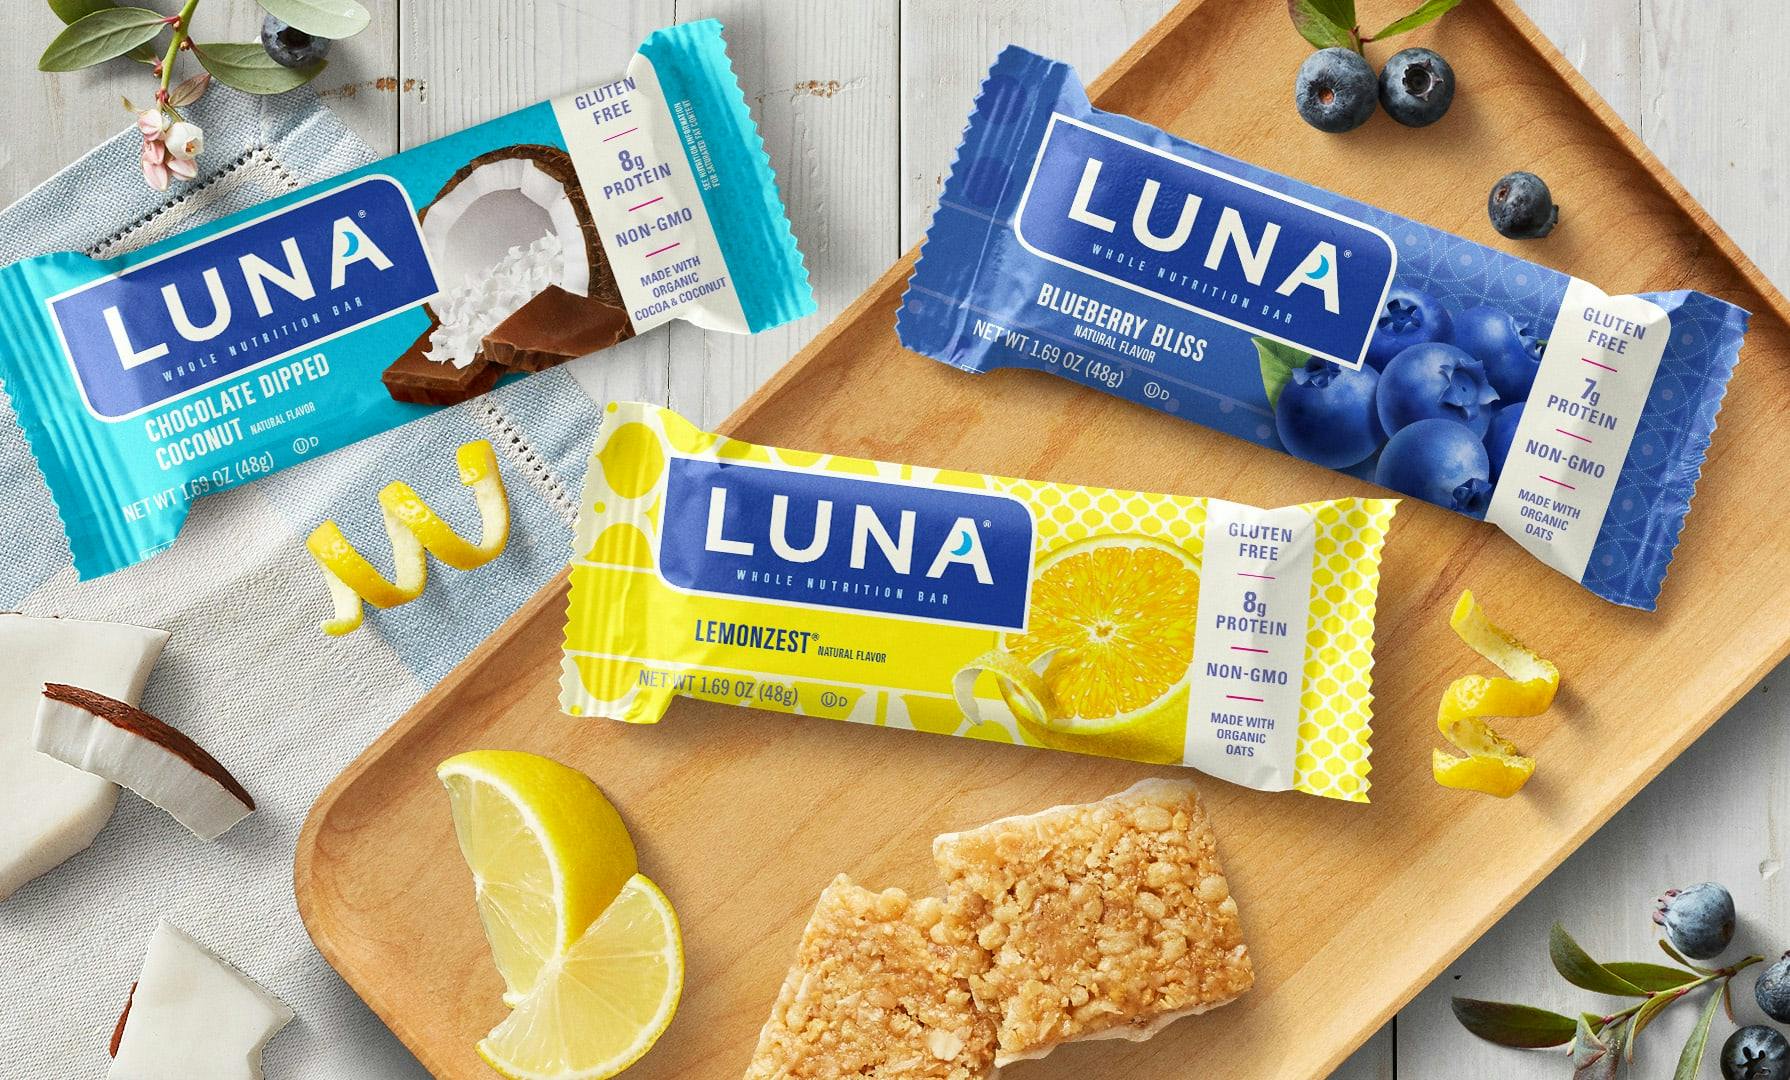 LUNA Bars - Lemonzest, Chocolate Dipped Coconut, and Blueberry Bliss